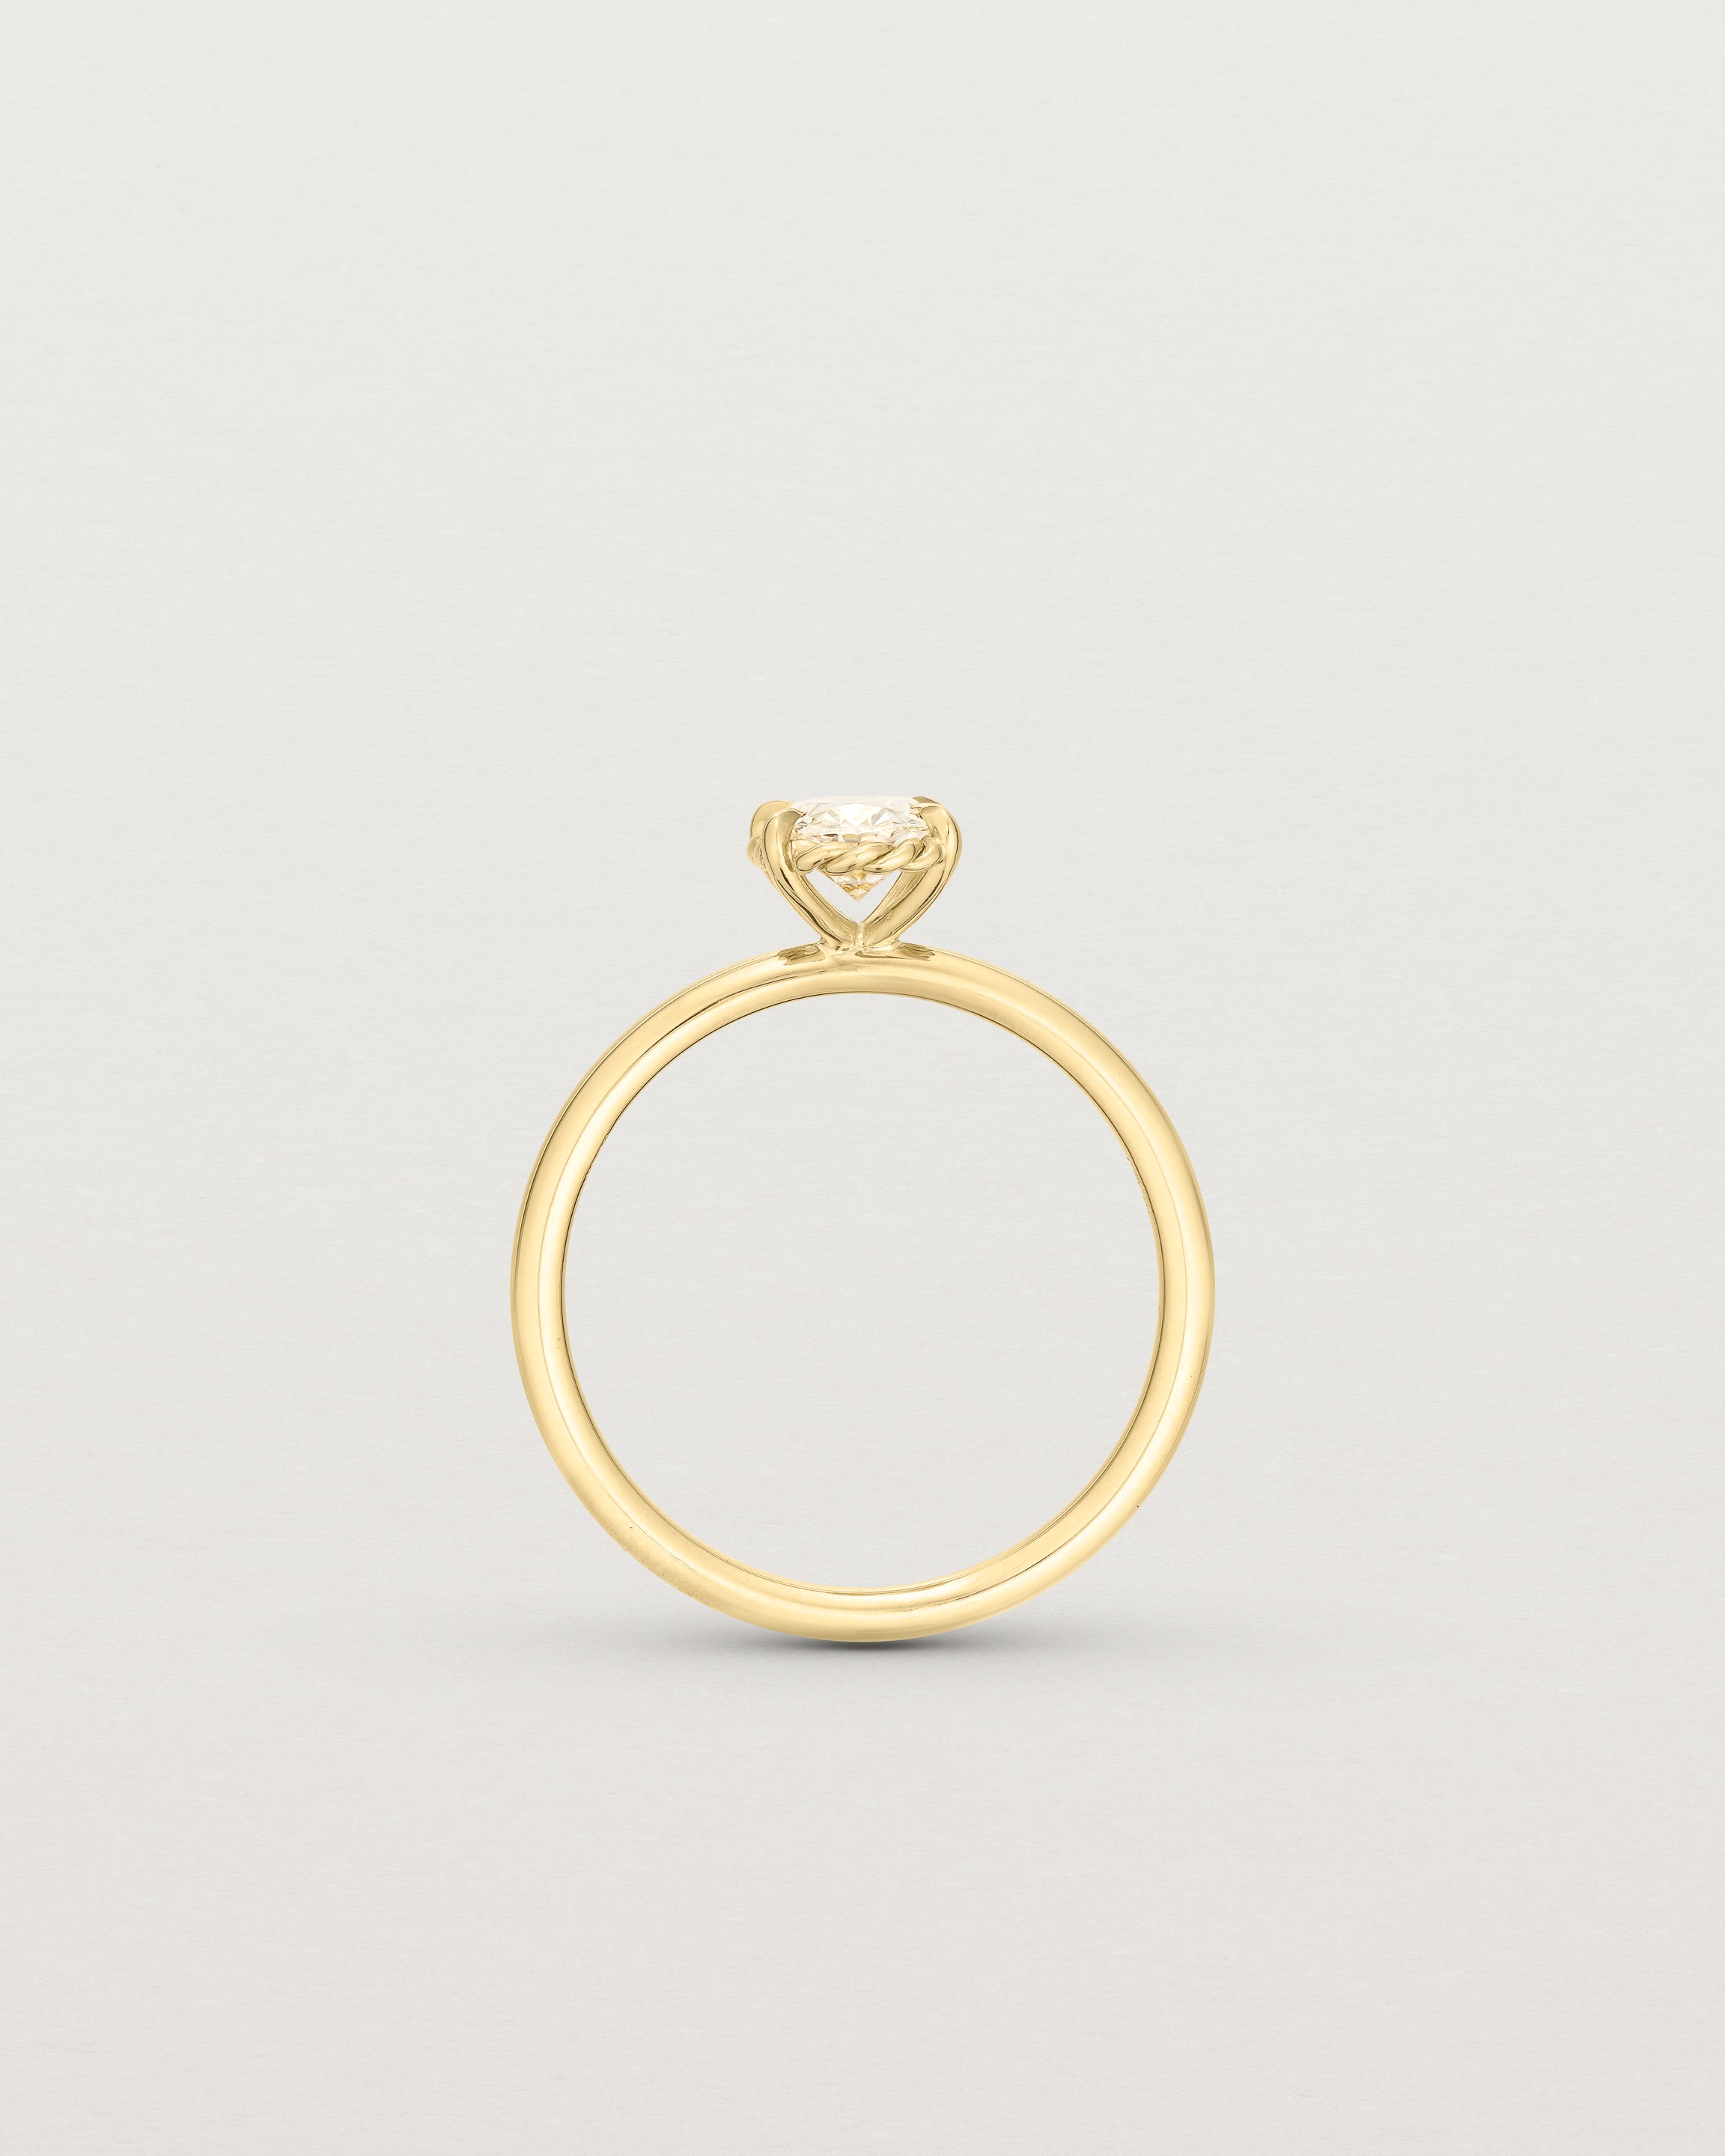 Standing image of yellow gold oval diamond solitaire